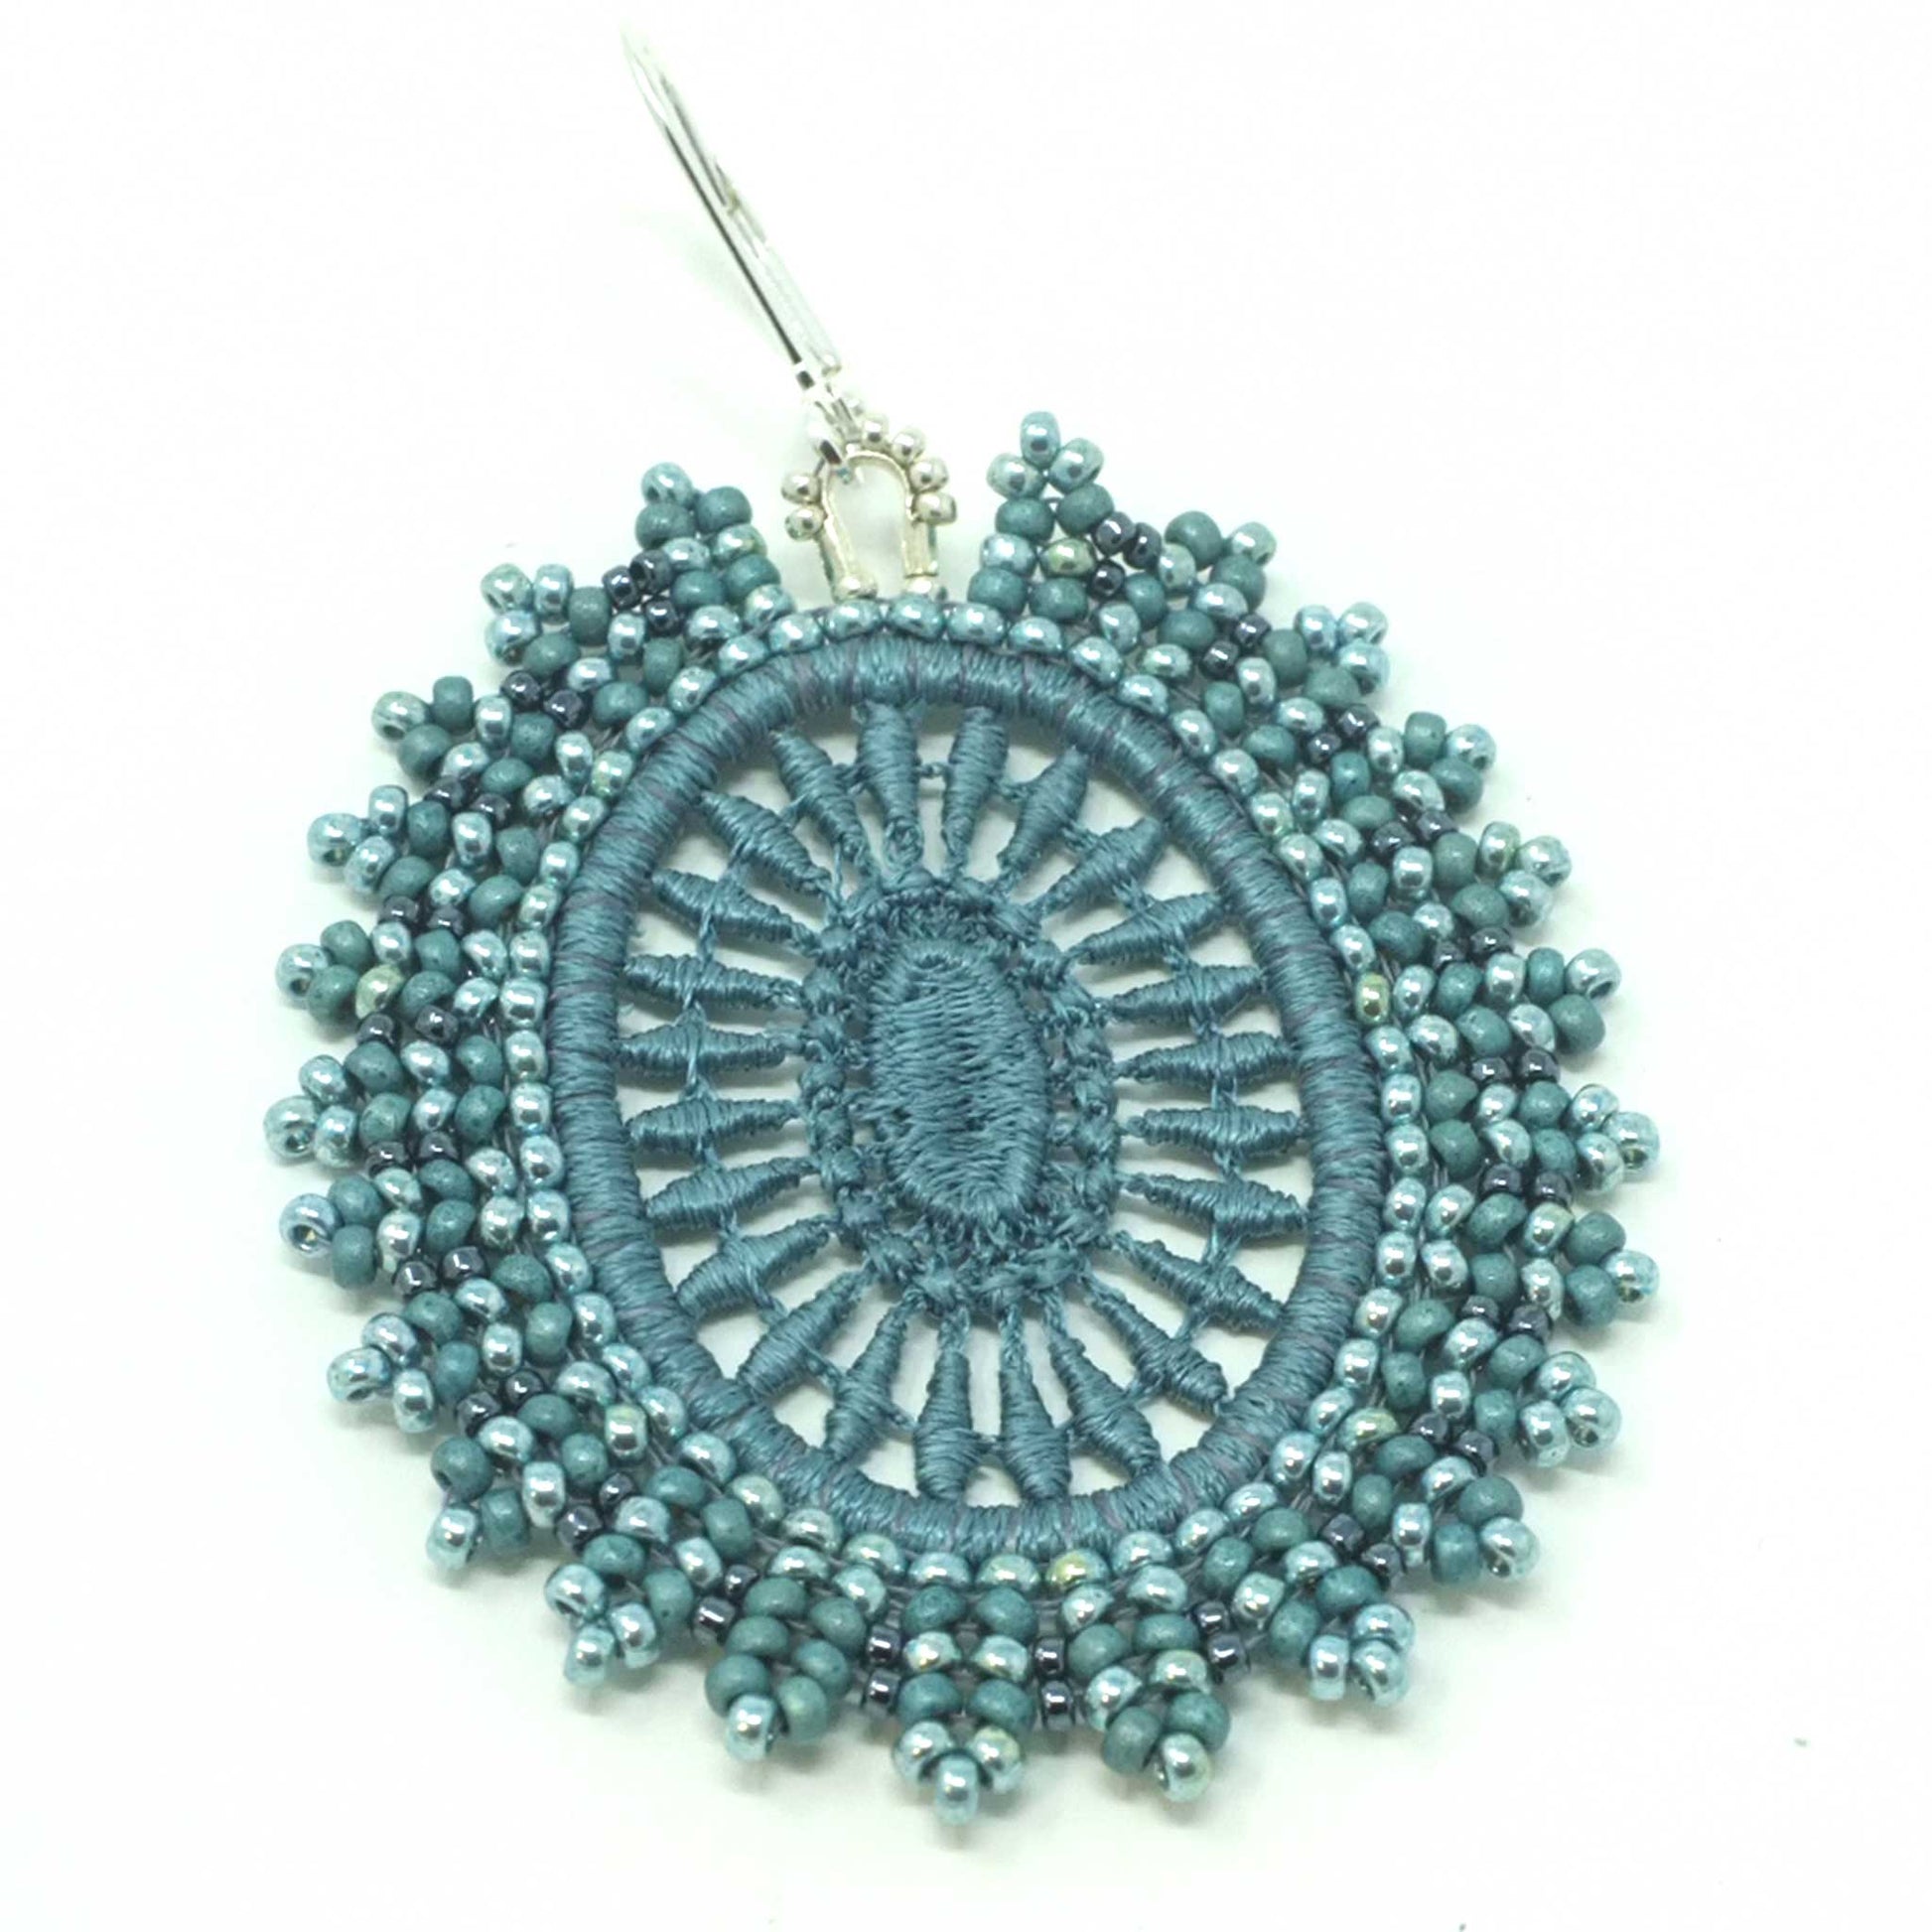 Lace Earring Beaded with Teal and Silver Beads